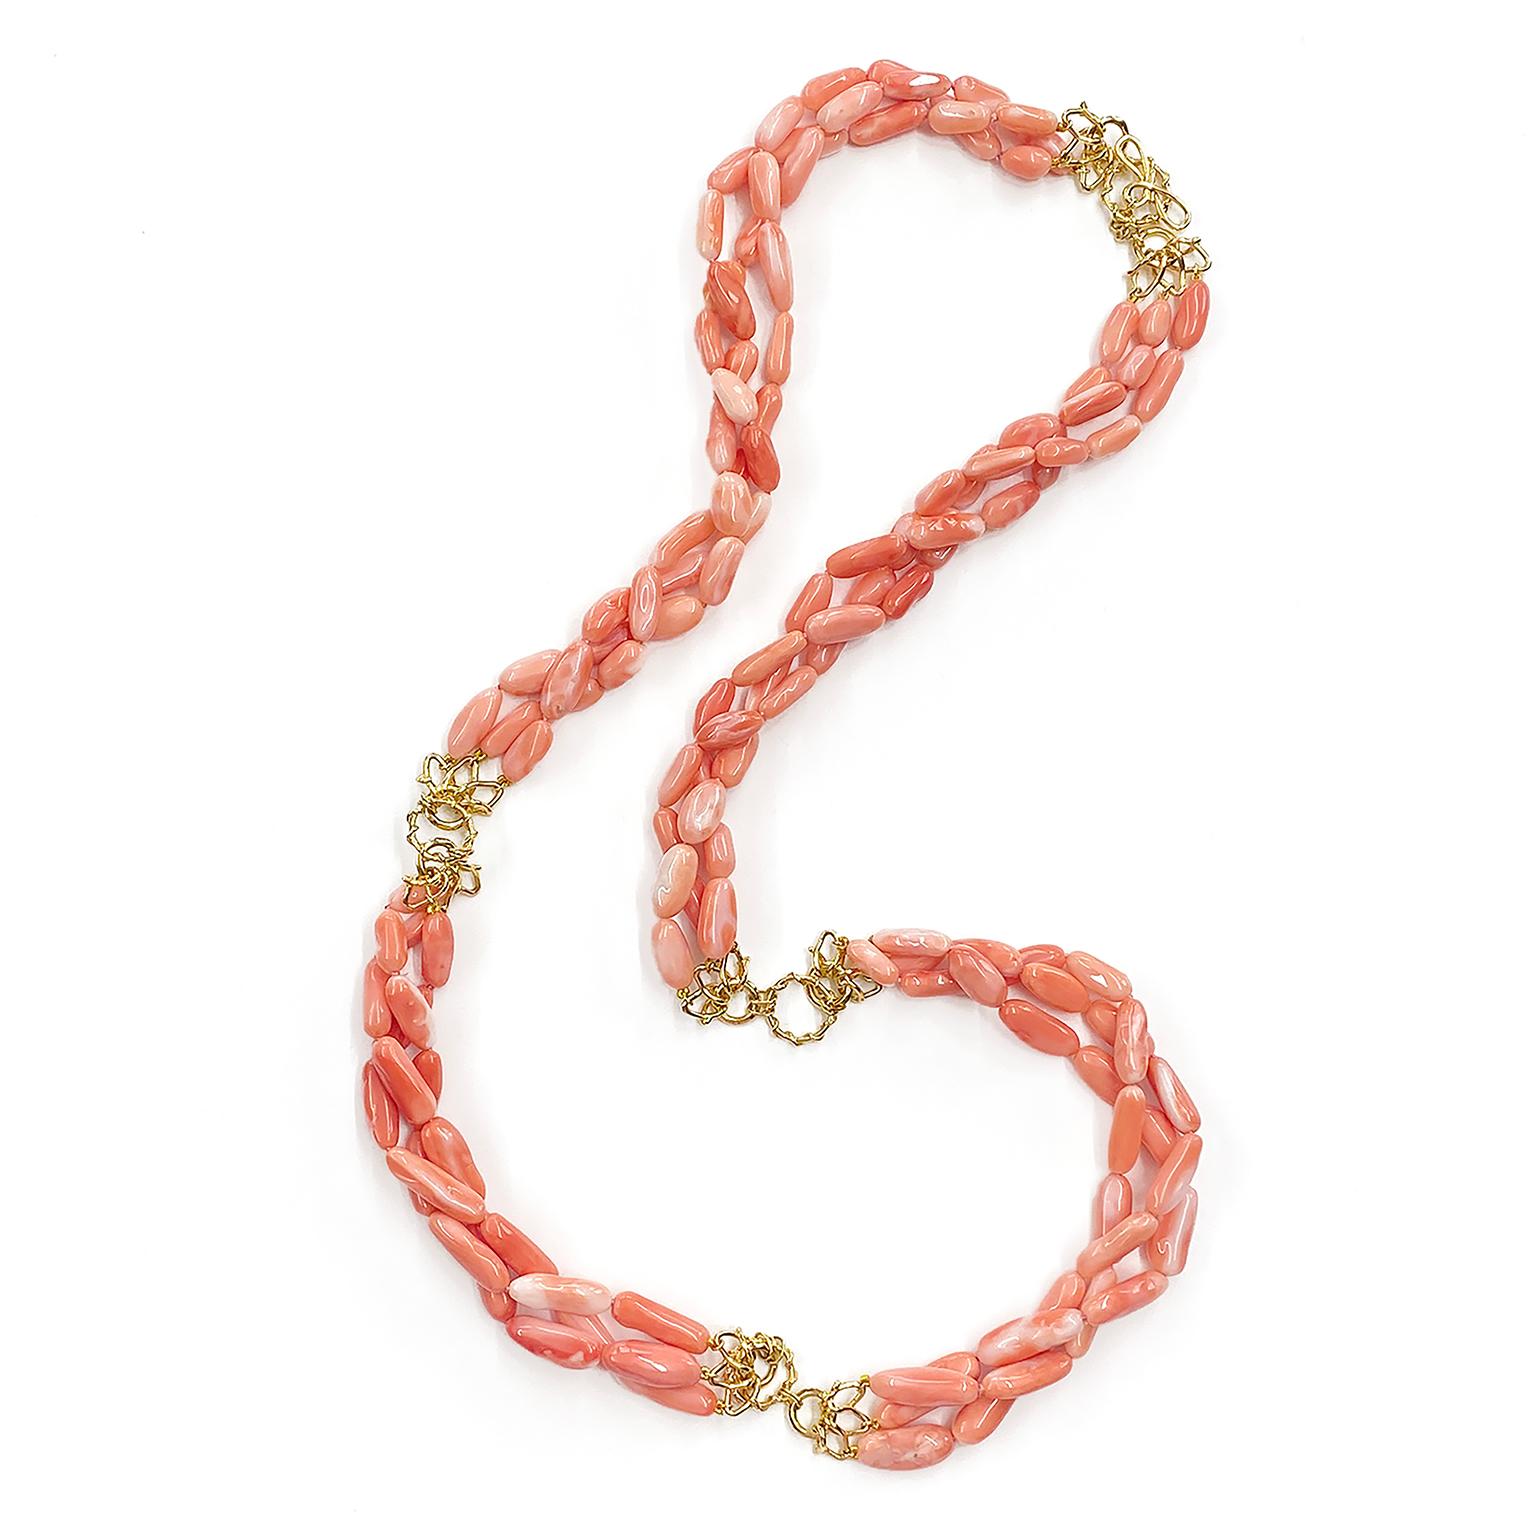 The elegance of angel skin coral is illustrated in three strands of carved nuggets. Three 18k yellow gold Vs connect to round rings throughout the necklace. The total weight of the corals are 882 carats. A knot and toggle clasp secures the necklace,